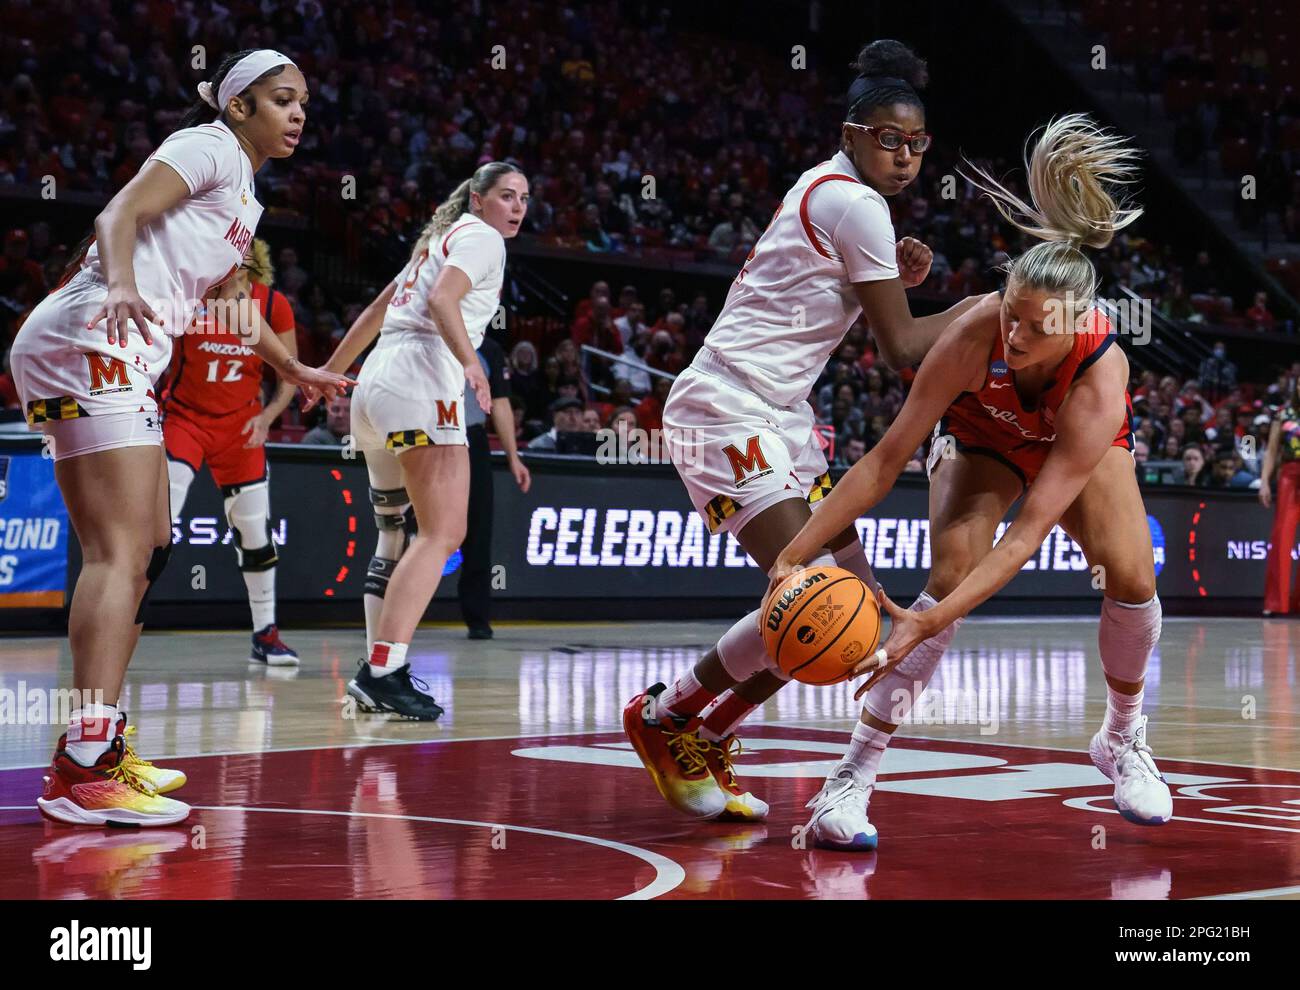 COLLEGE PARK, MD - MARCH 19: Maryland Terrapins guard Shyanne Sellers (0) watches as Arizona Wildcats forward Cate Reese (25) collects a loose ball during the Arizona Wildcats game versus the Maryland Terrapins game in the second four of the NCAA Women's Basketball Championship Greenville Regional 1 on March 19, 2023 at Xfinity Center in College Park, MD. (Photo by Tony Quinn/Icon Sportswire) (Icon Sportswire via AP Images) Stock Photo